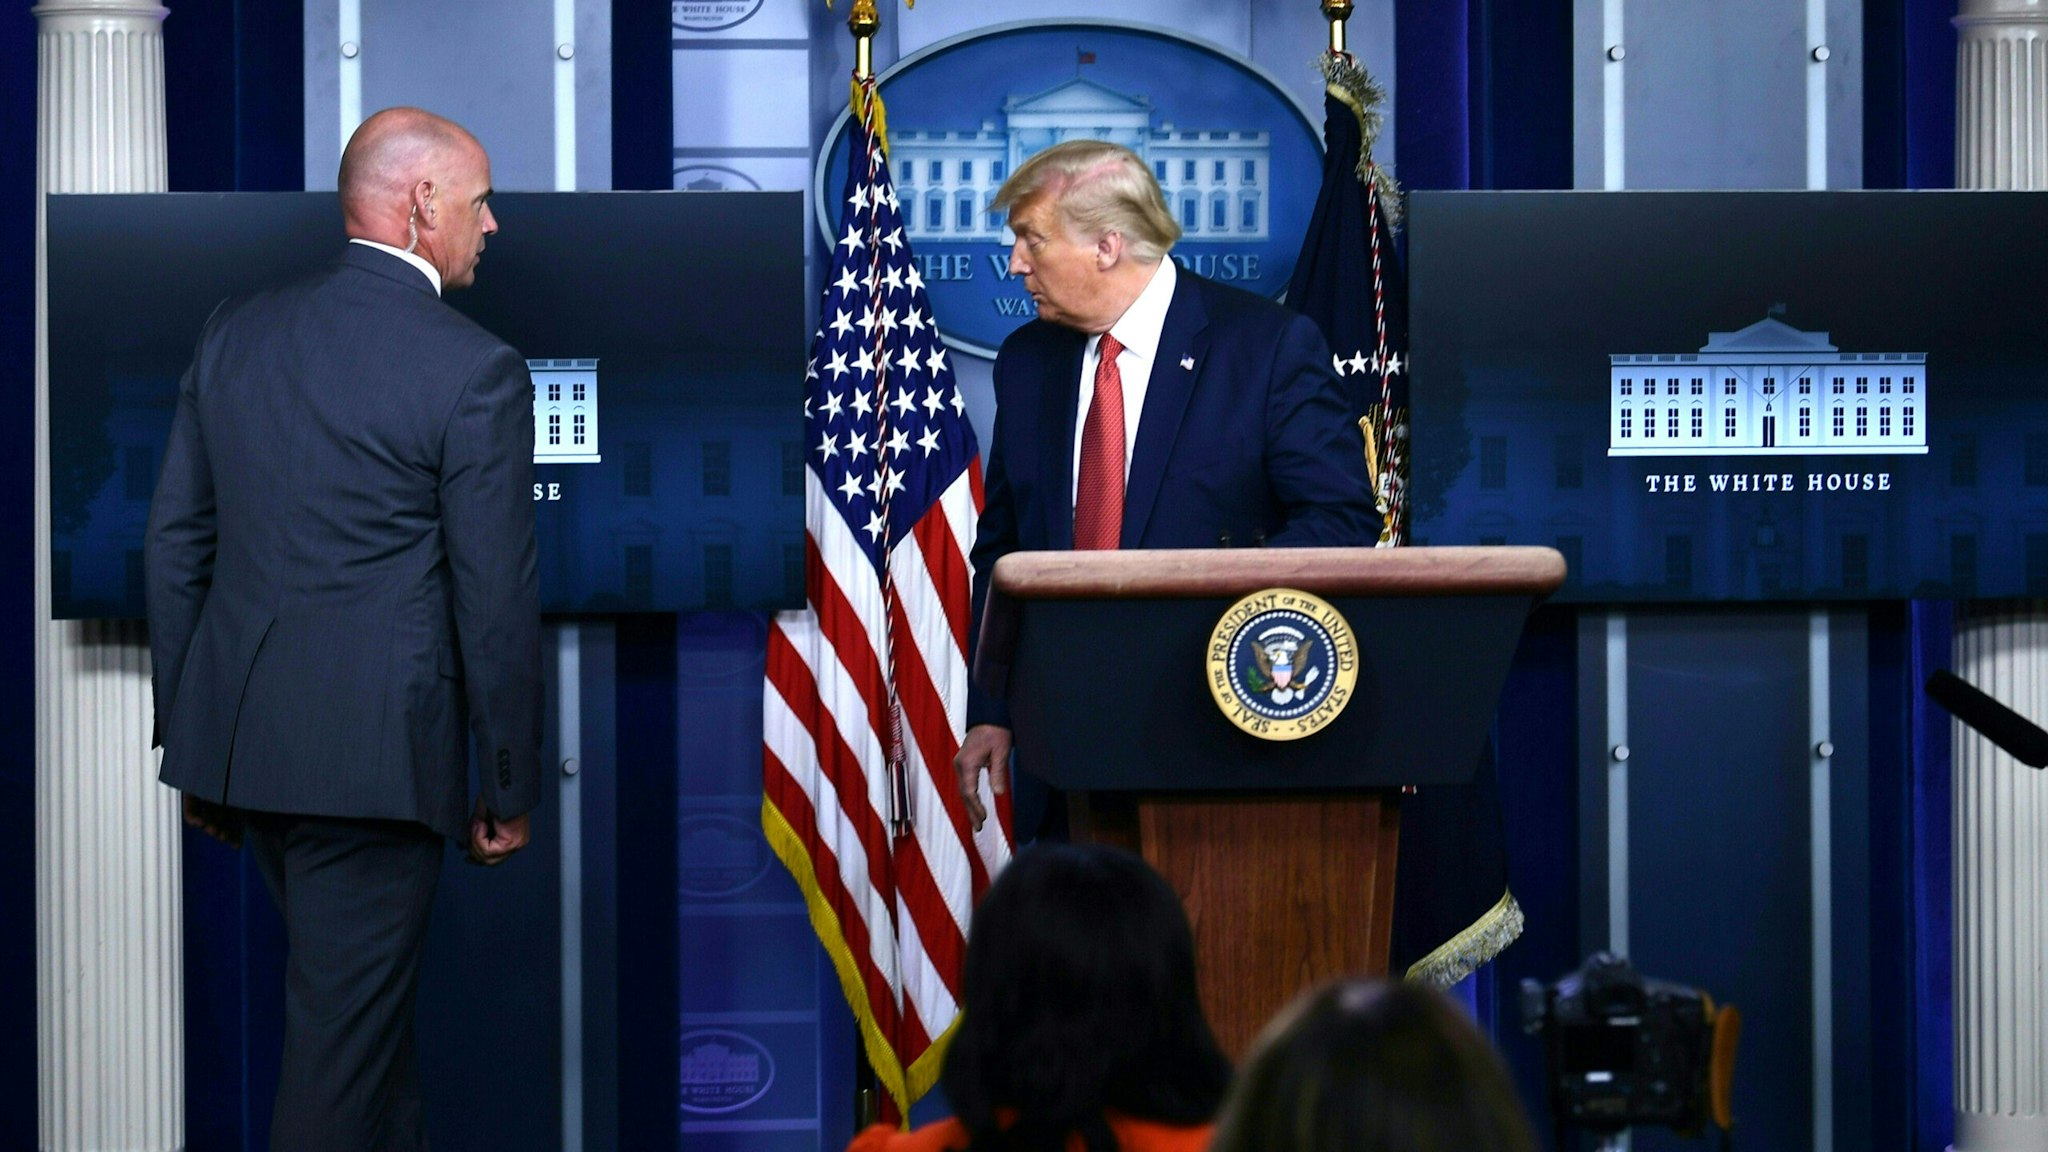 US President Donald Trump is being removed from the Brady Briefing Room of the White House in Washington, DC, on August 10, 2020.